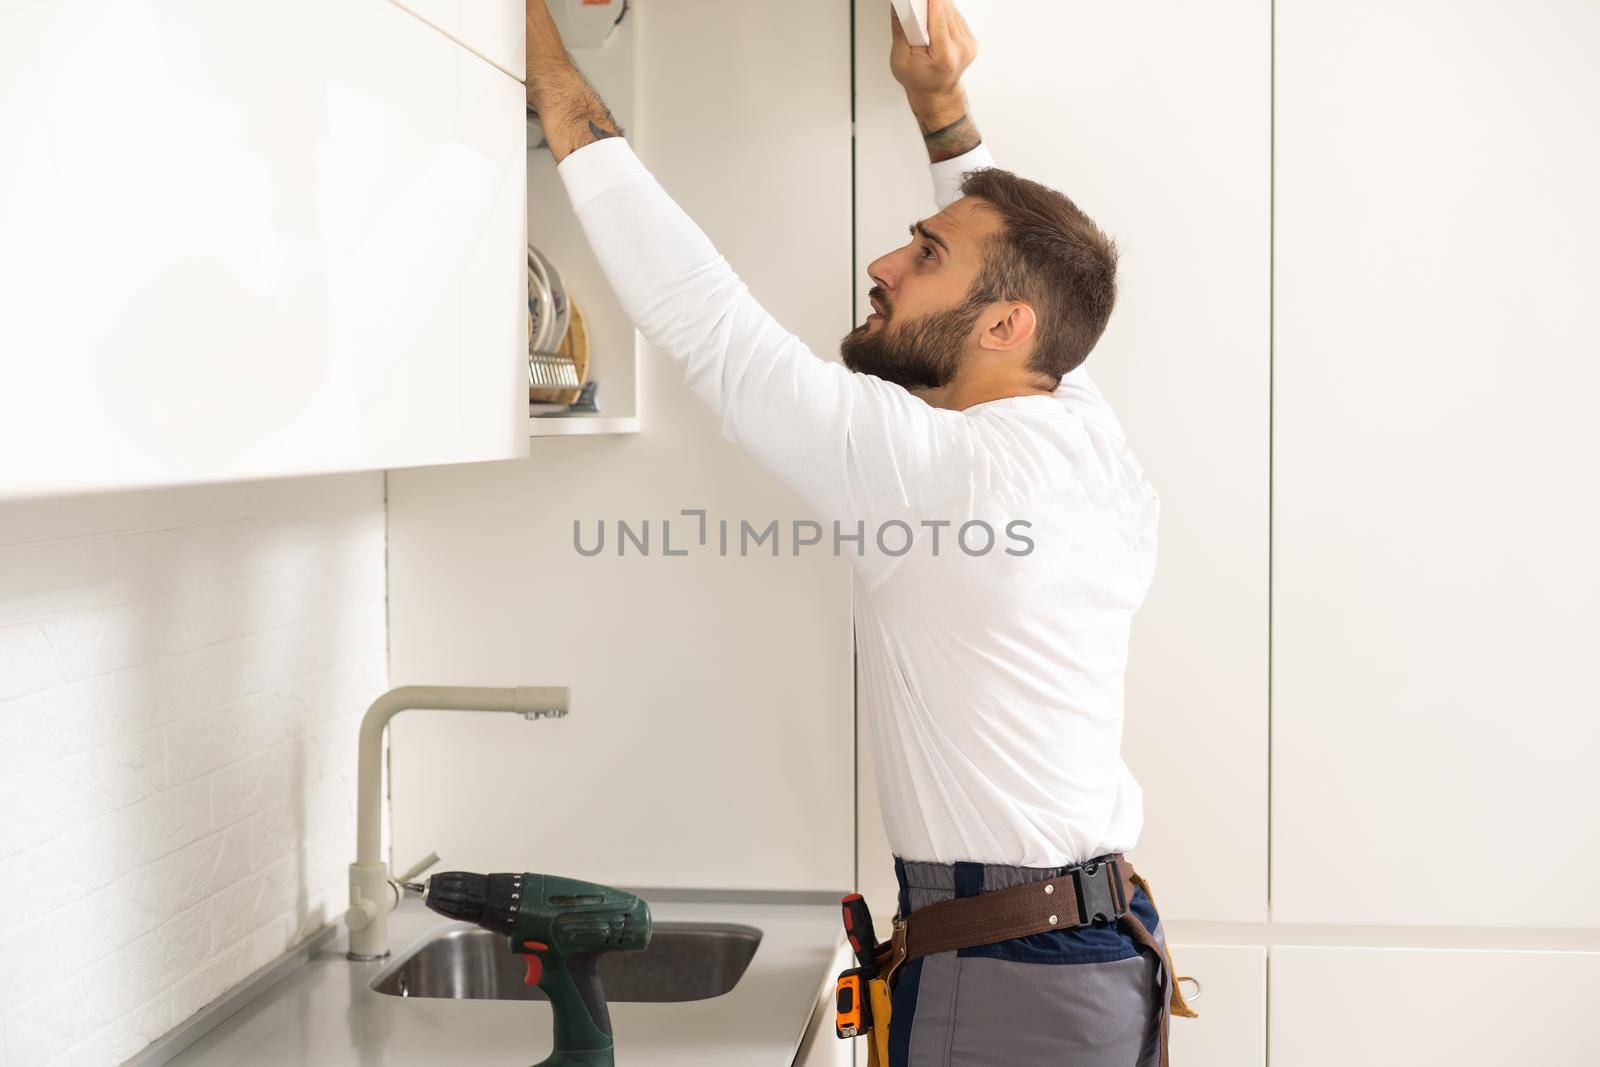 Two handymen, workers in uniform fixing, installing furniture and equipment in the kitchen, using screwdriver indoors. Furniture repair and assembly concept